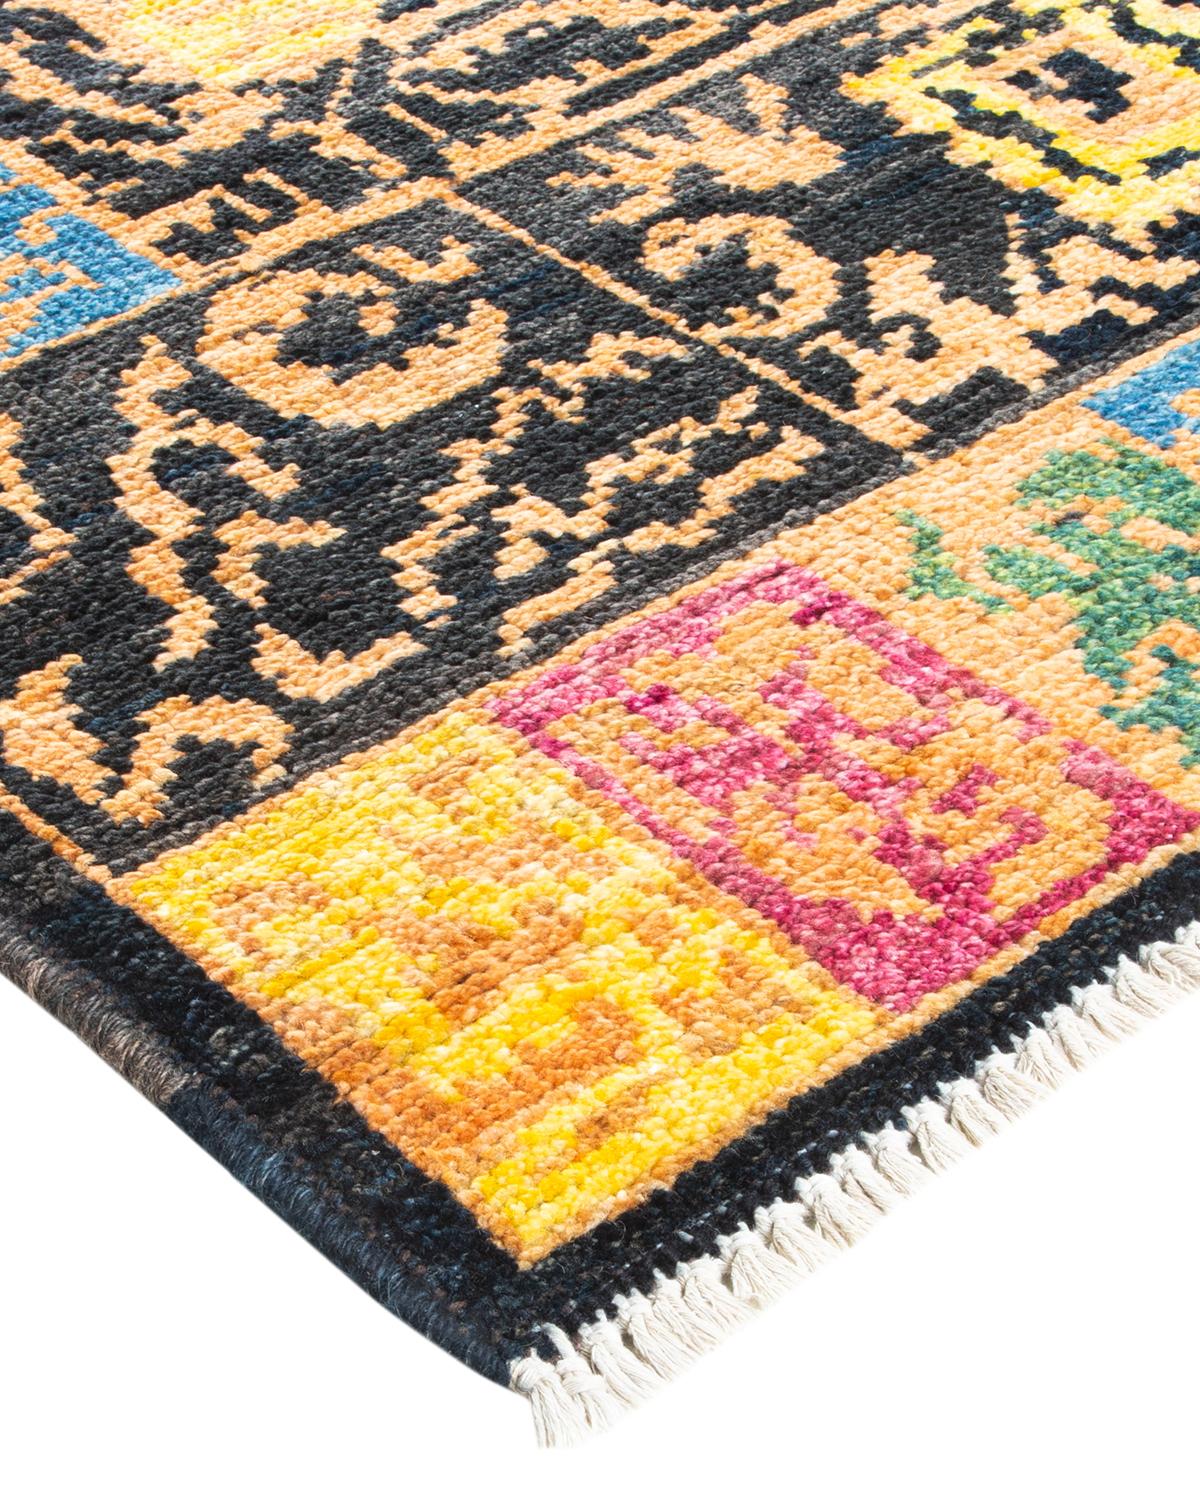 Morocco’s rug-making heritage encompasses everything from plush, neutral Beni Ourains to colorful, lightweight kilims. Paying homage to traditional craftsmanship and centuries-old motifs, these handmade rugs deliver a vibrant spirit to any space